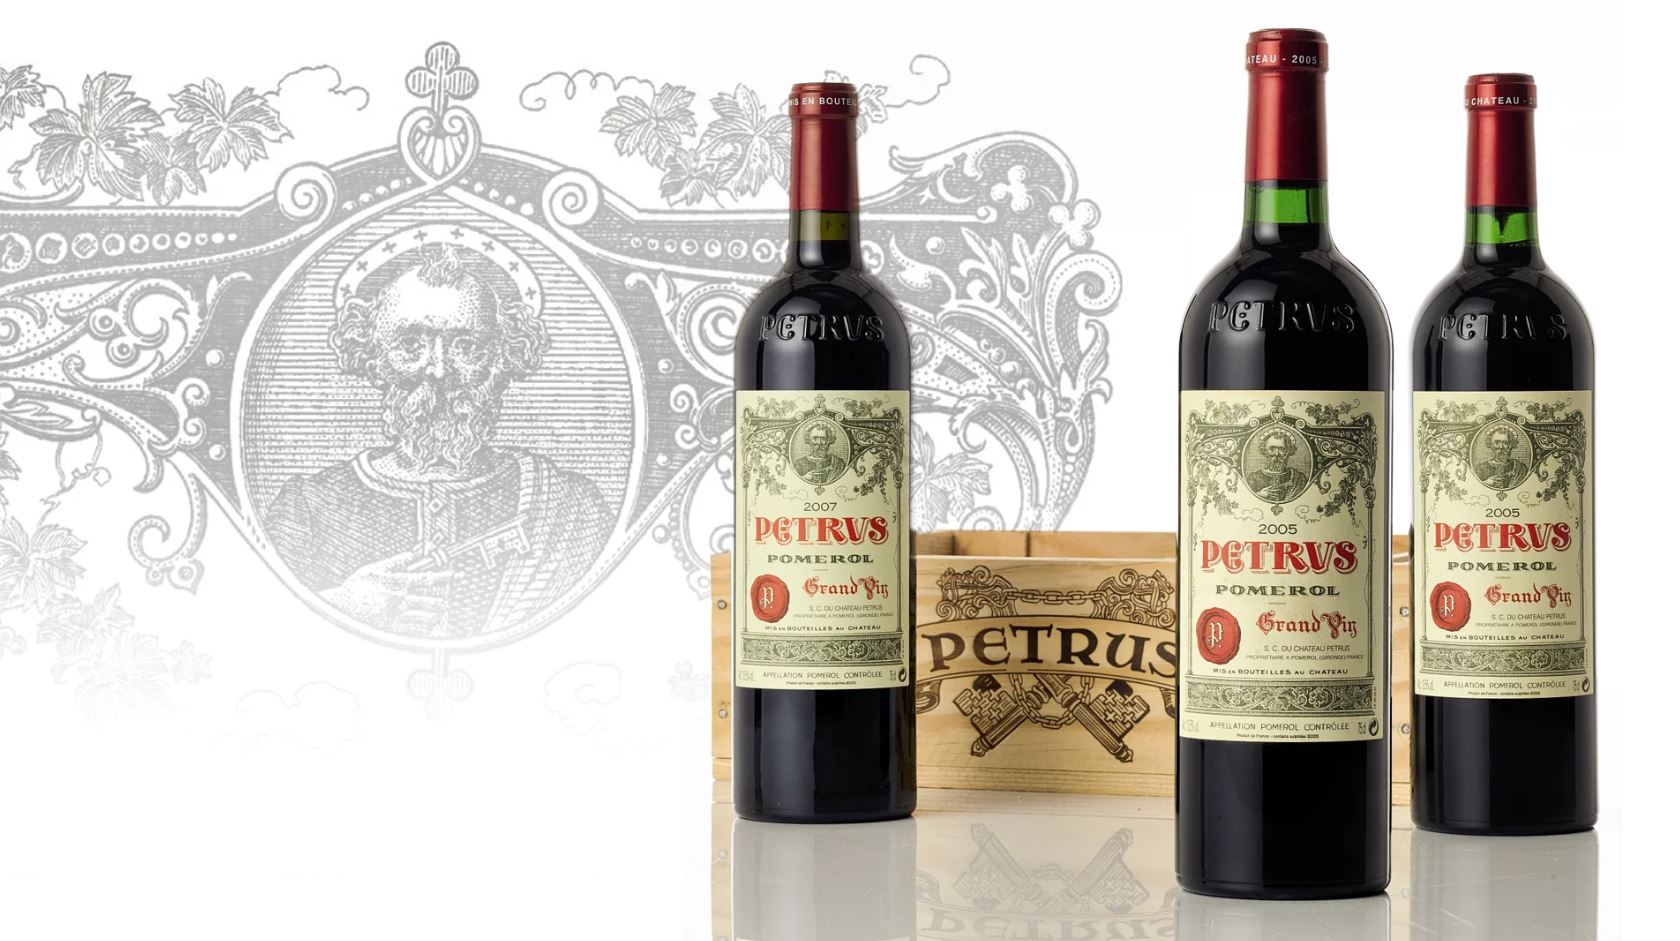 5 Facts About Petrus Wine, The Most Expensive Wines